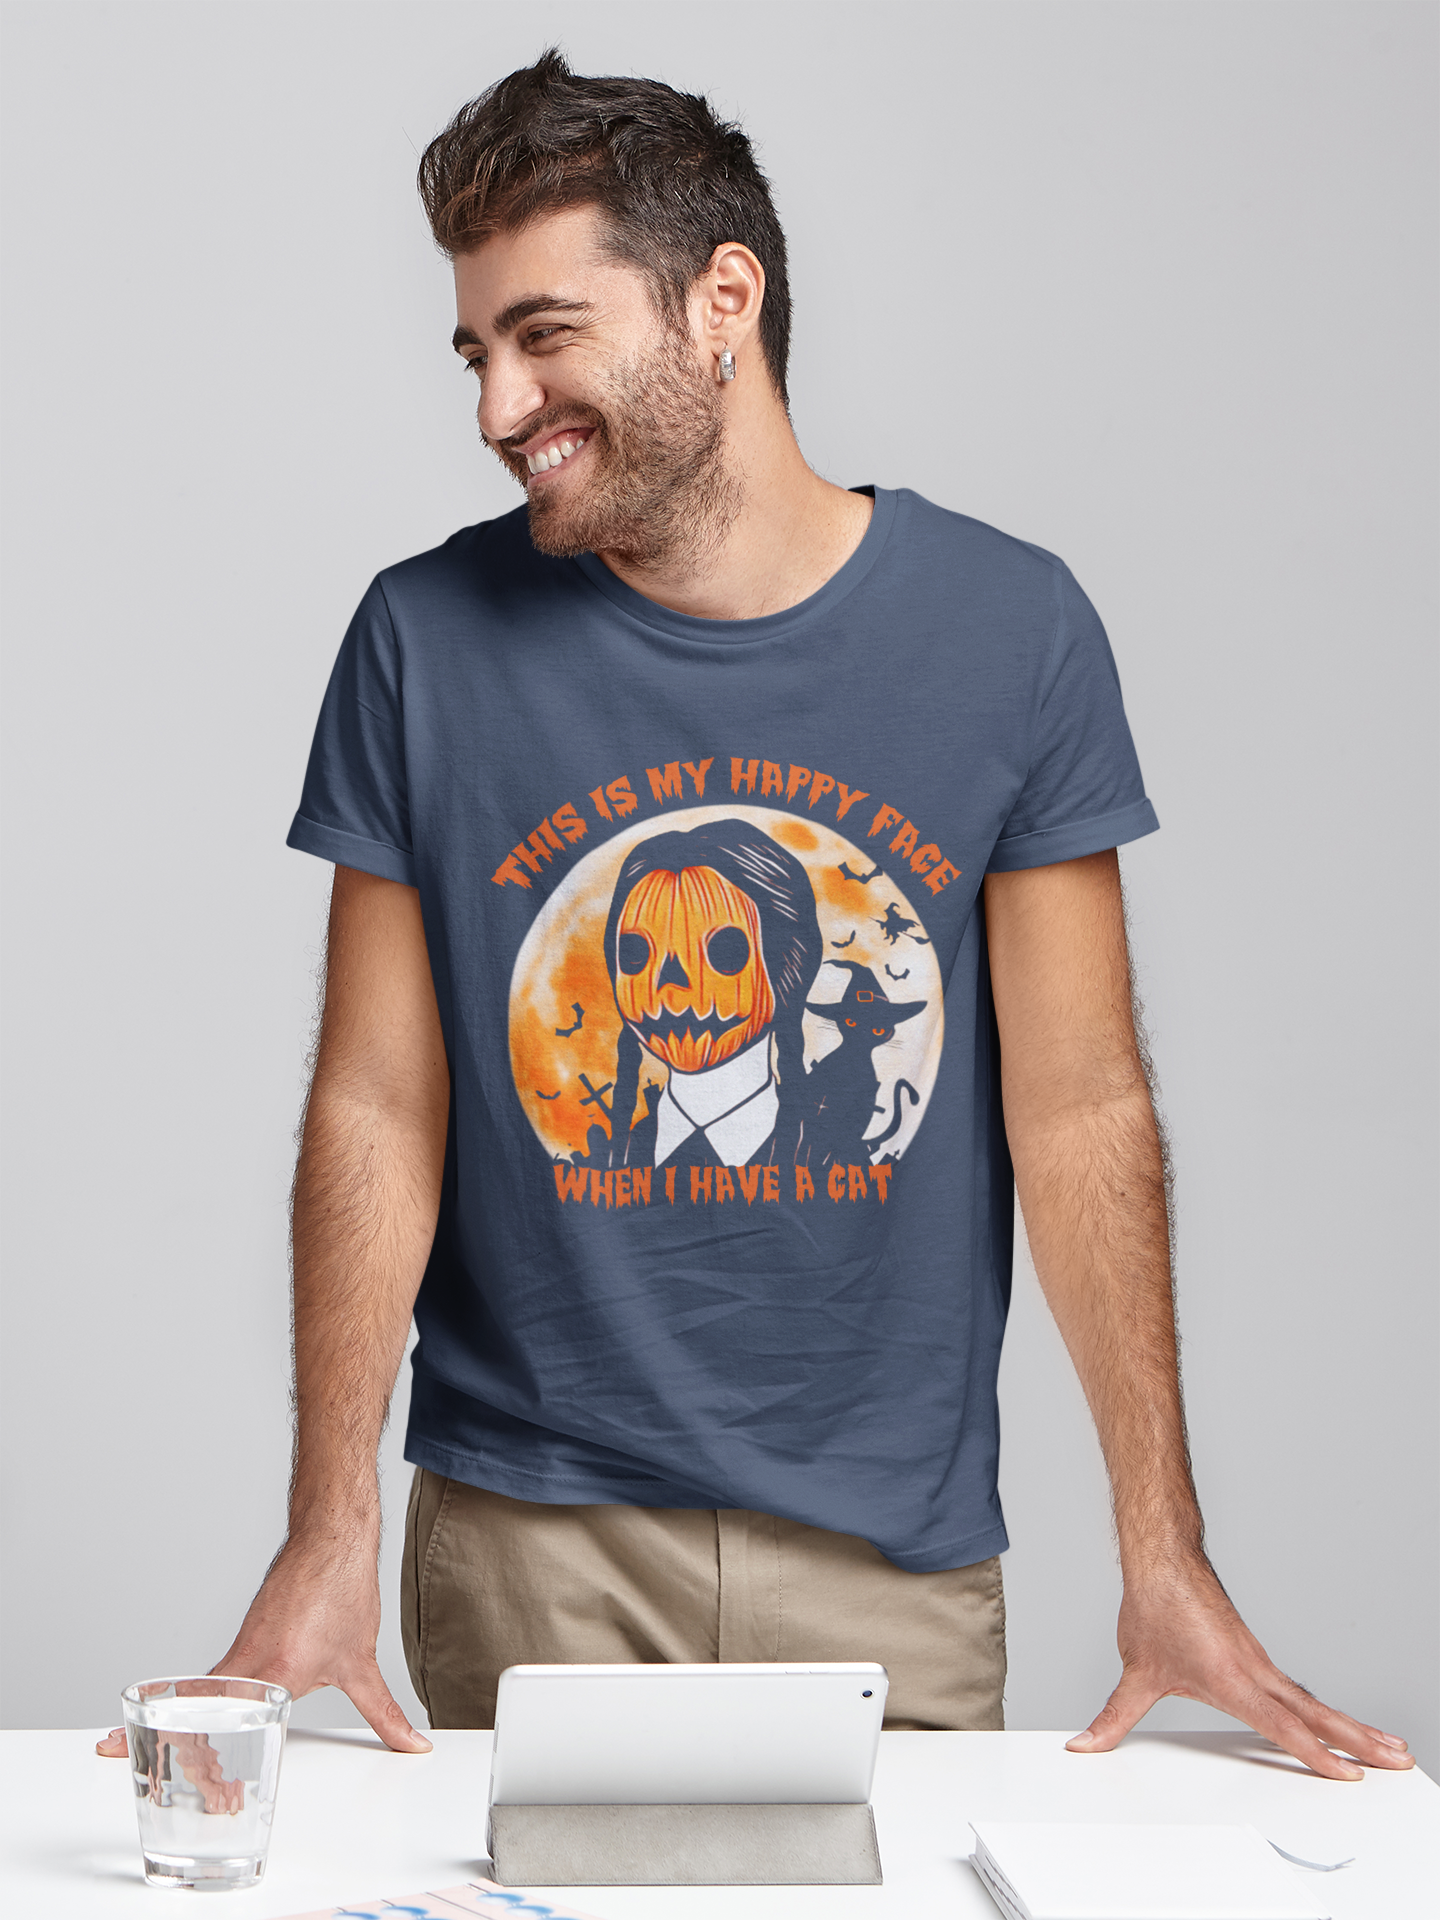 Addams Family T Shirt, Wednesday Addams T Shirt, This Is My Happy Face When I Have A Cat Tshirt, Halloween Gifts